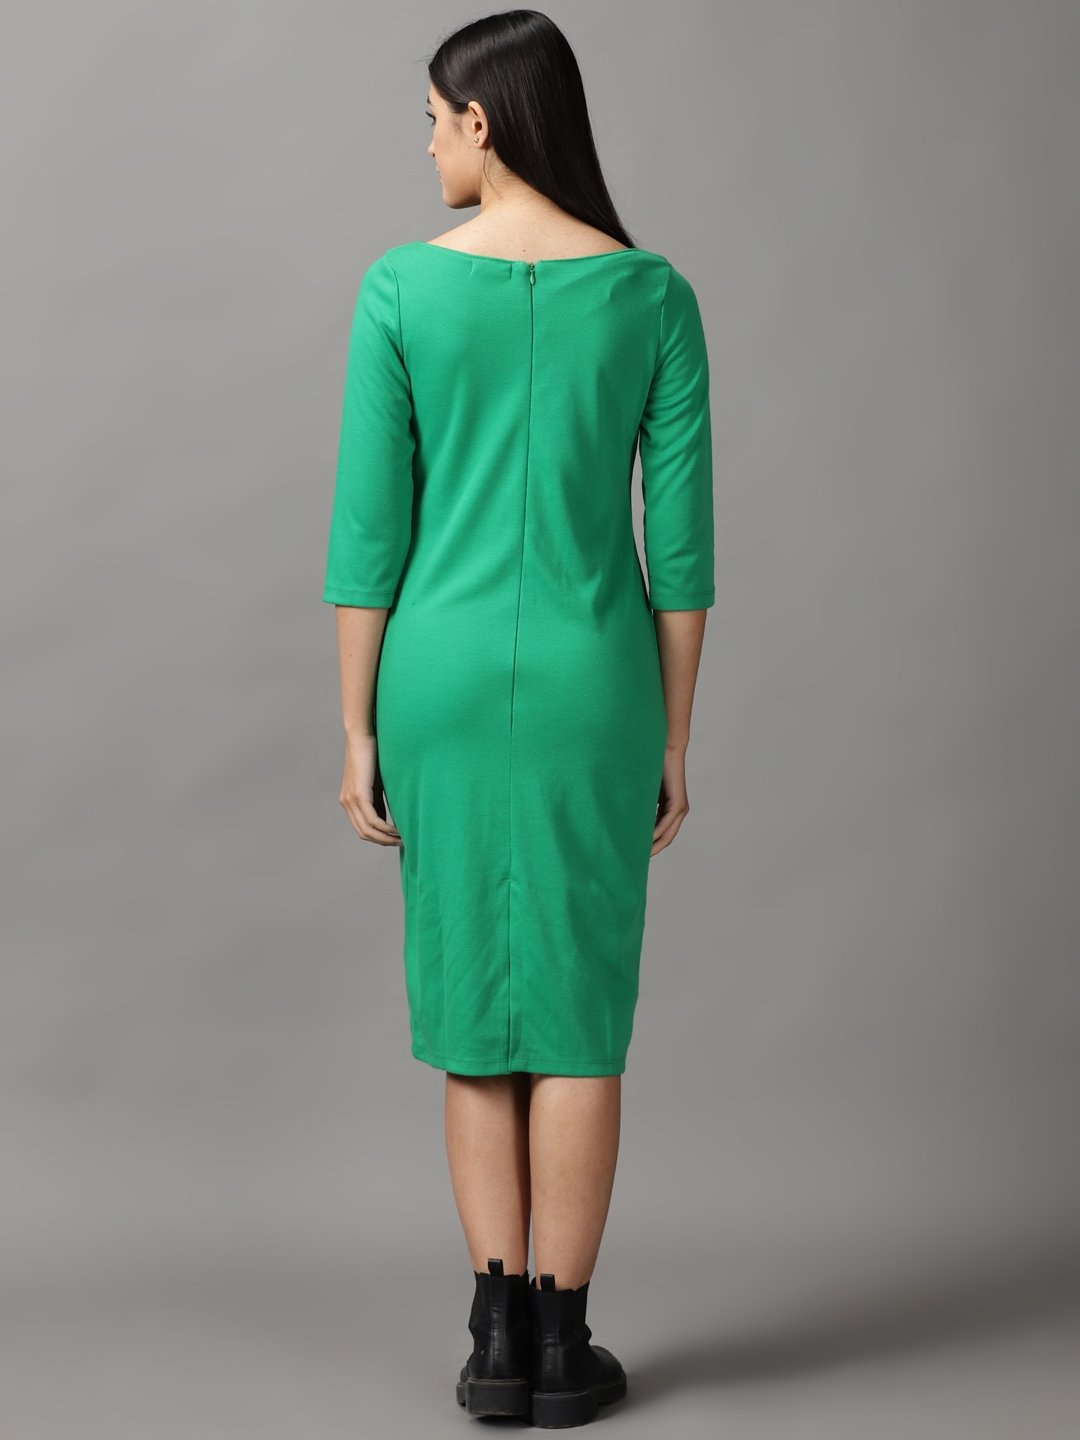 Women's Green Cotton Solid Dresses